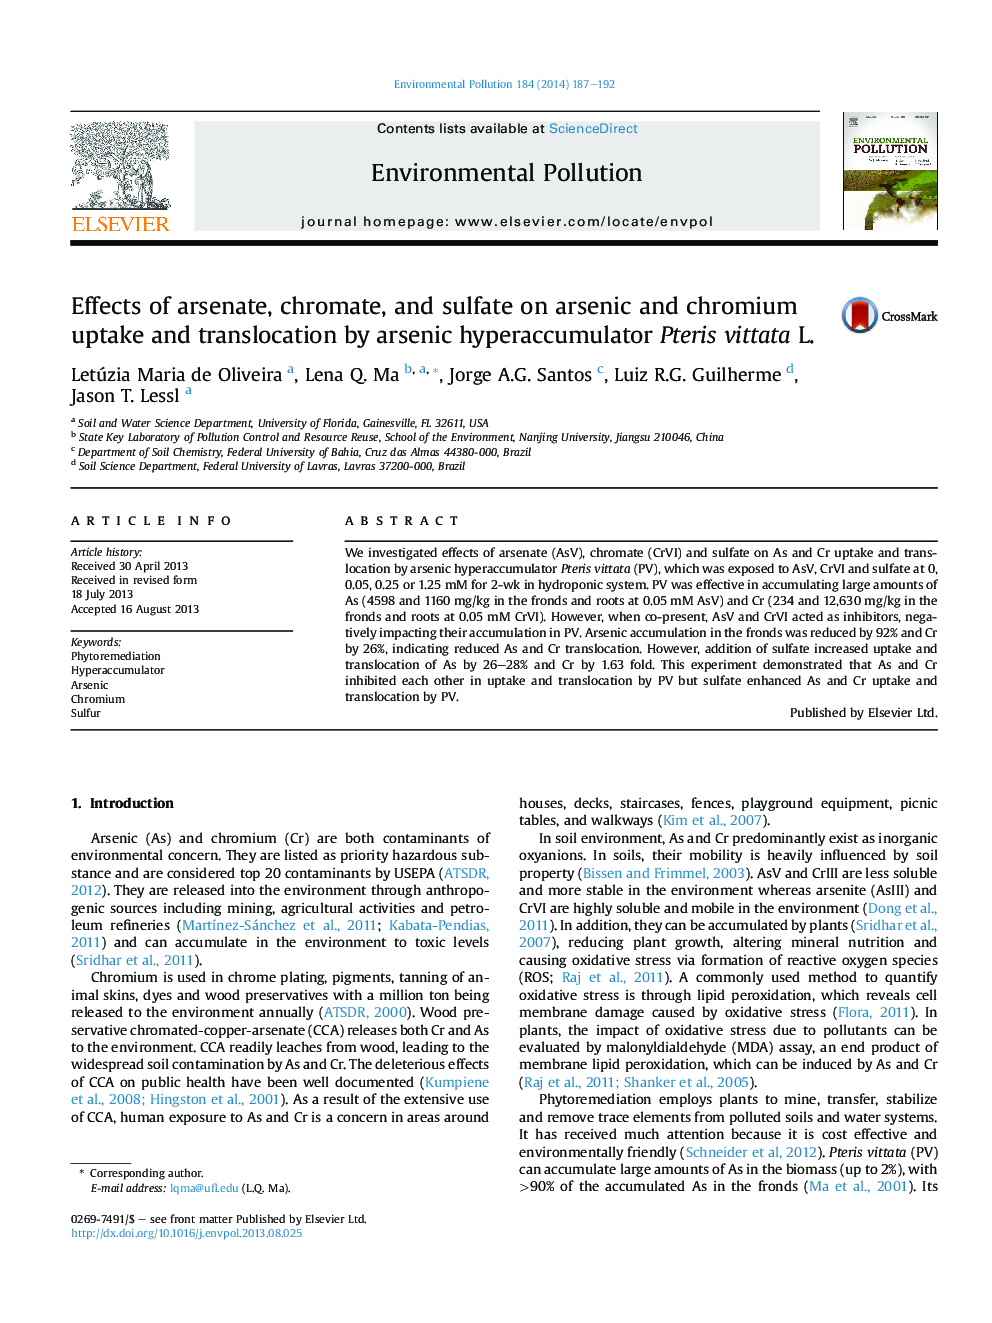 Effects of arsenate, chromate, and sulfate on arsenic and chromium uptake and translocation by arsenic hyperaccumulator Pteris vittata L.